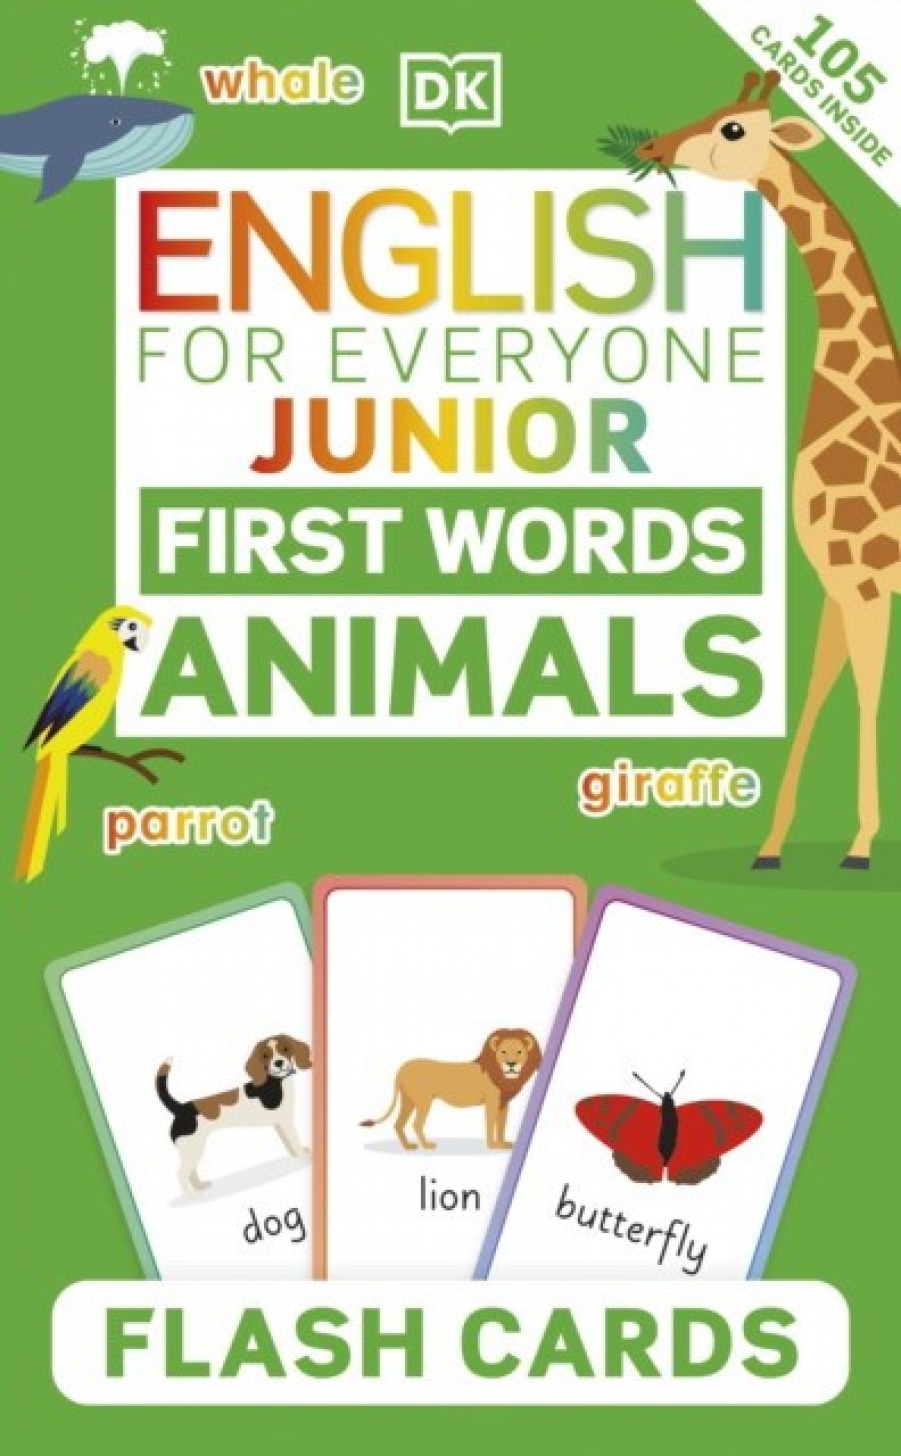 Dk English for everyone junior first words animals flash cards 